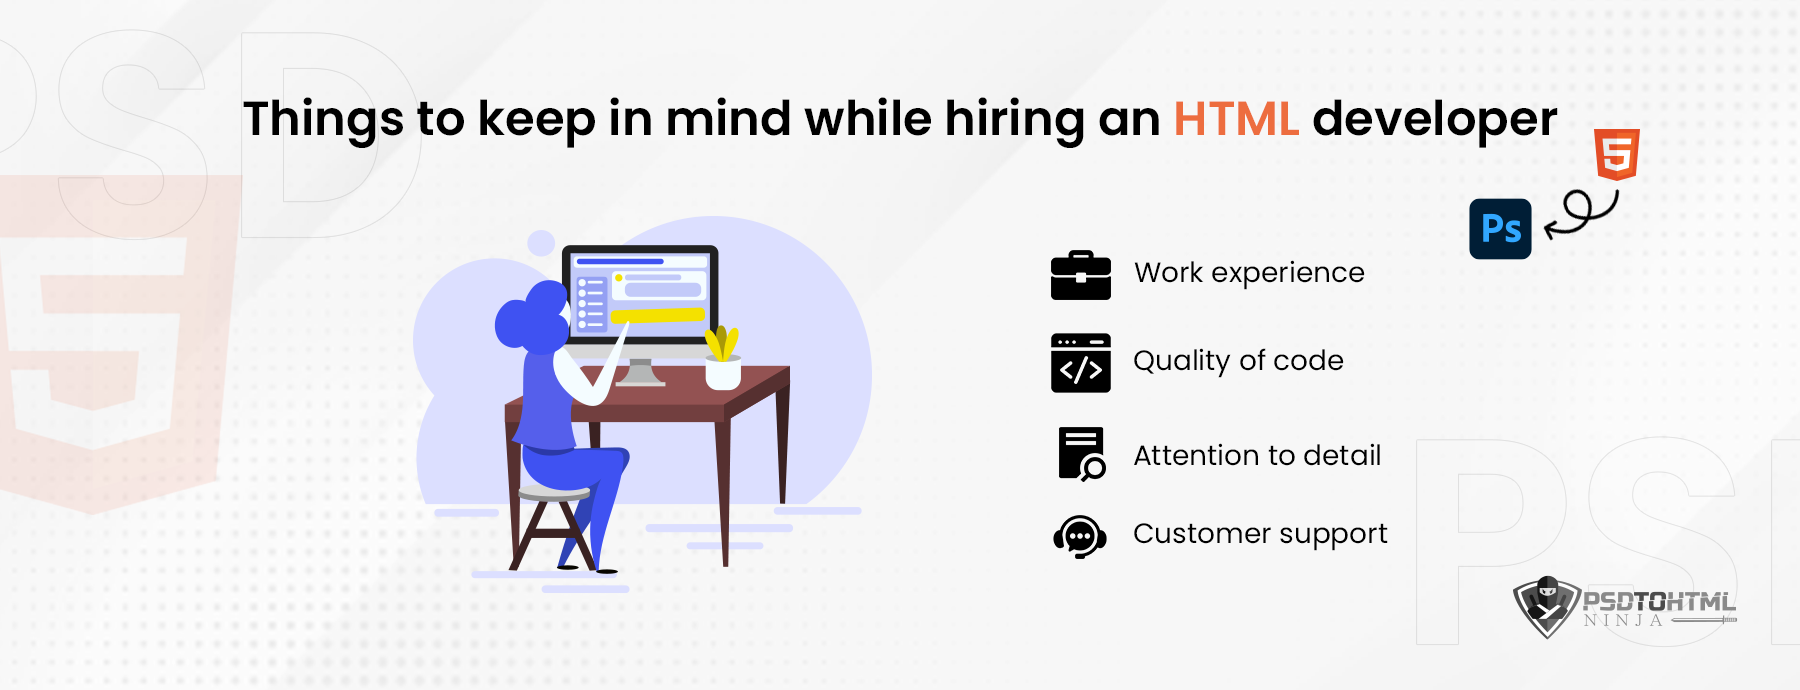 Things to keep in mind while hiring an HTML developer